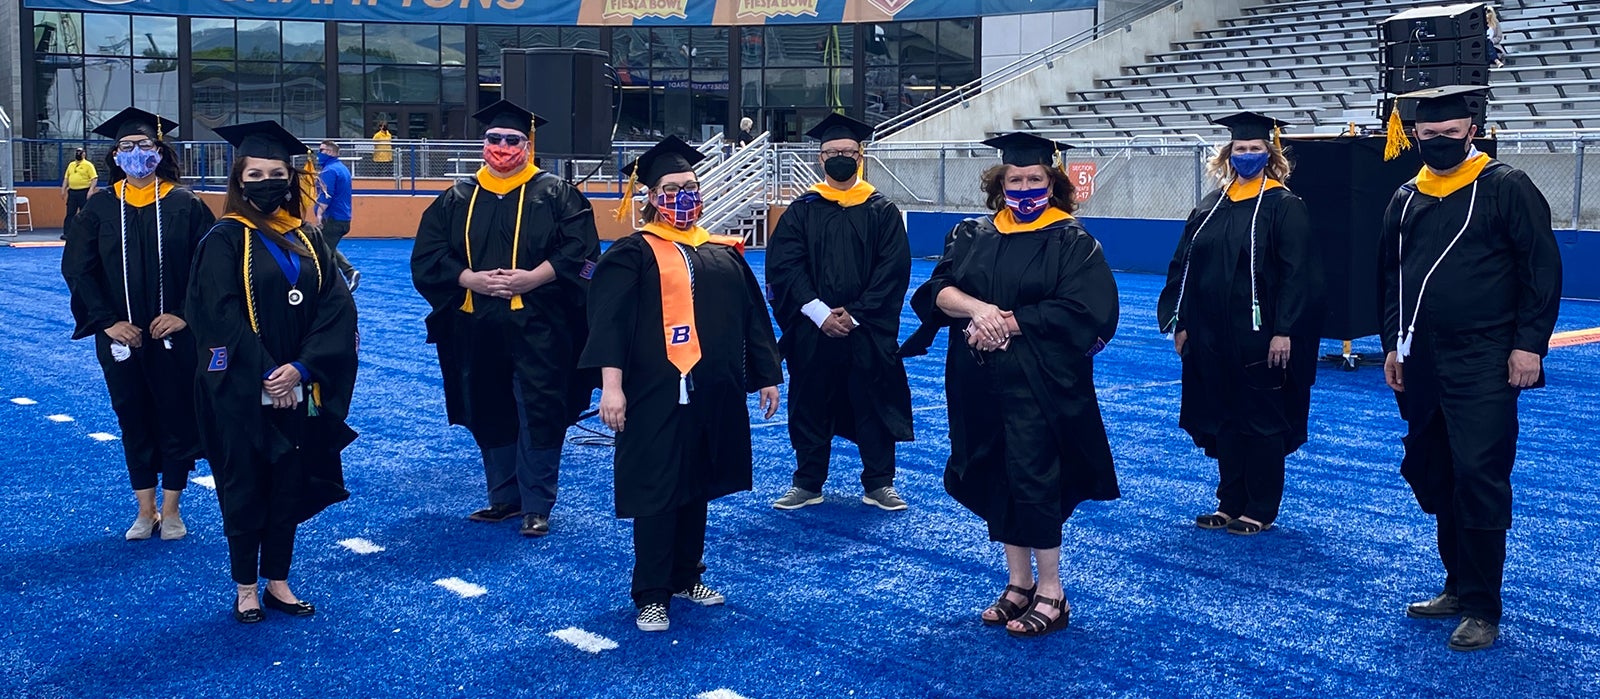 First graduating class of the Master of Science in Respiratory Care program pose in regalia on the Blue Turf